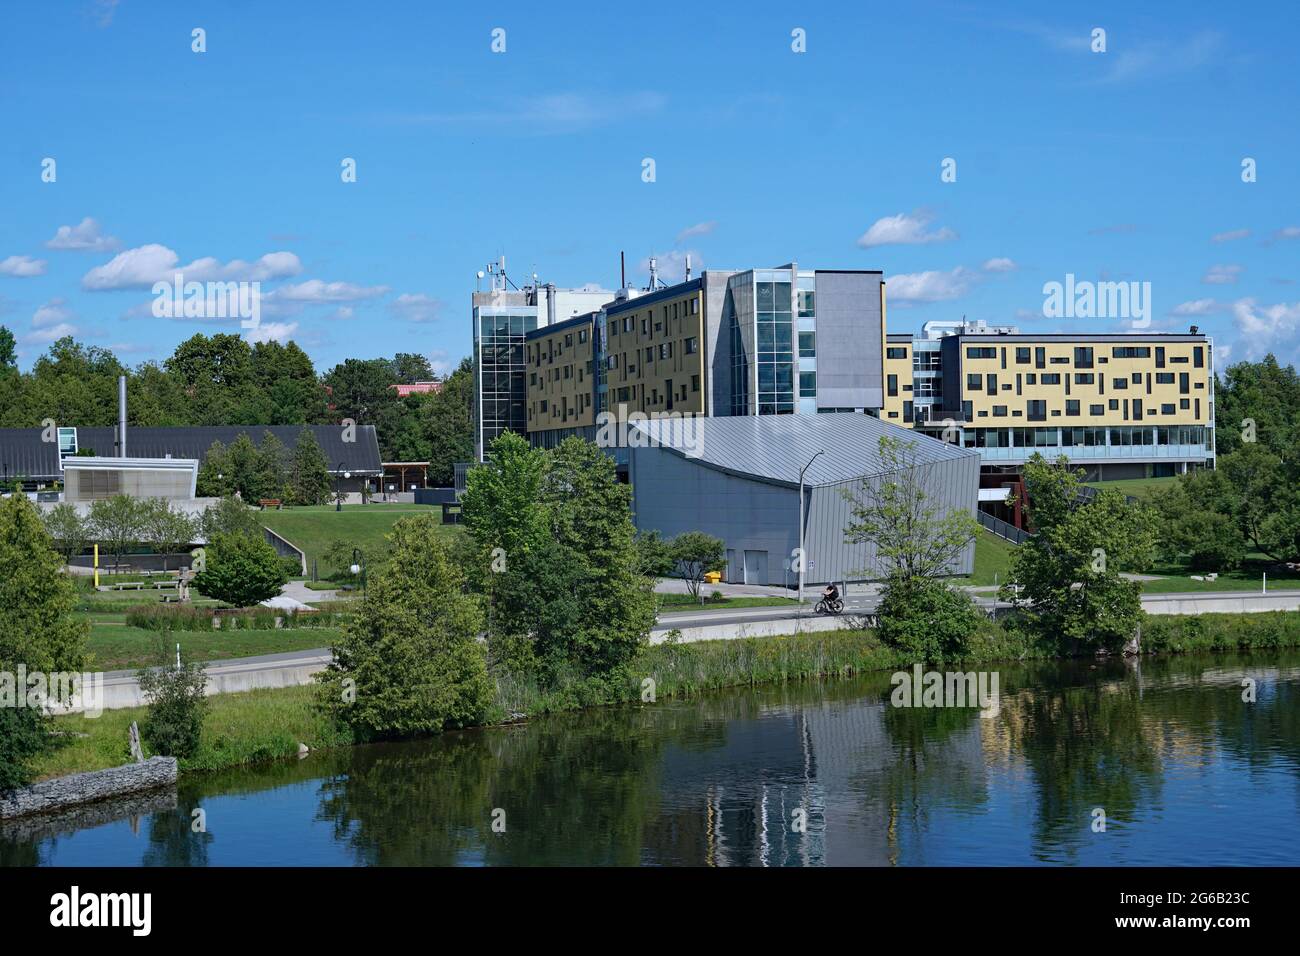 Trent University is a small city liberal arts university with modern architecture in a scenic riverside location. Stock Photo